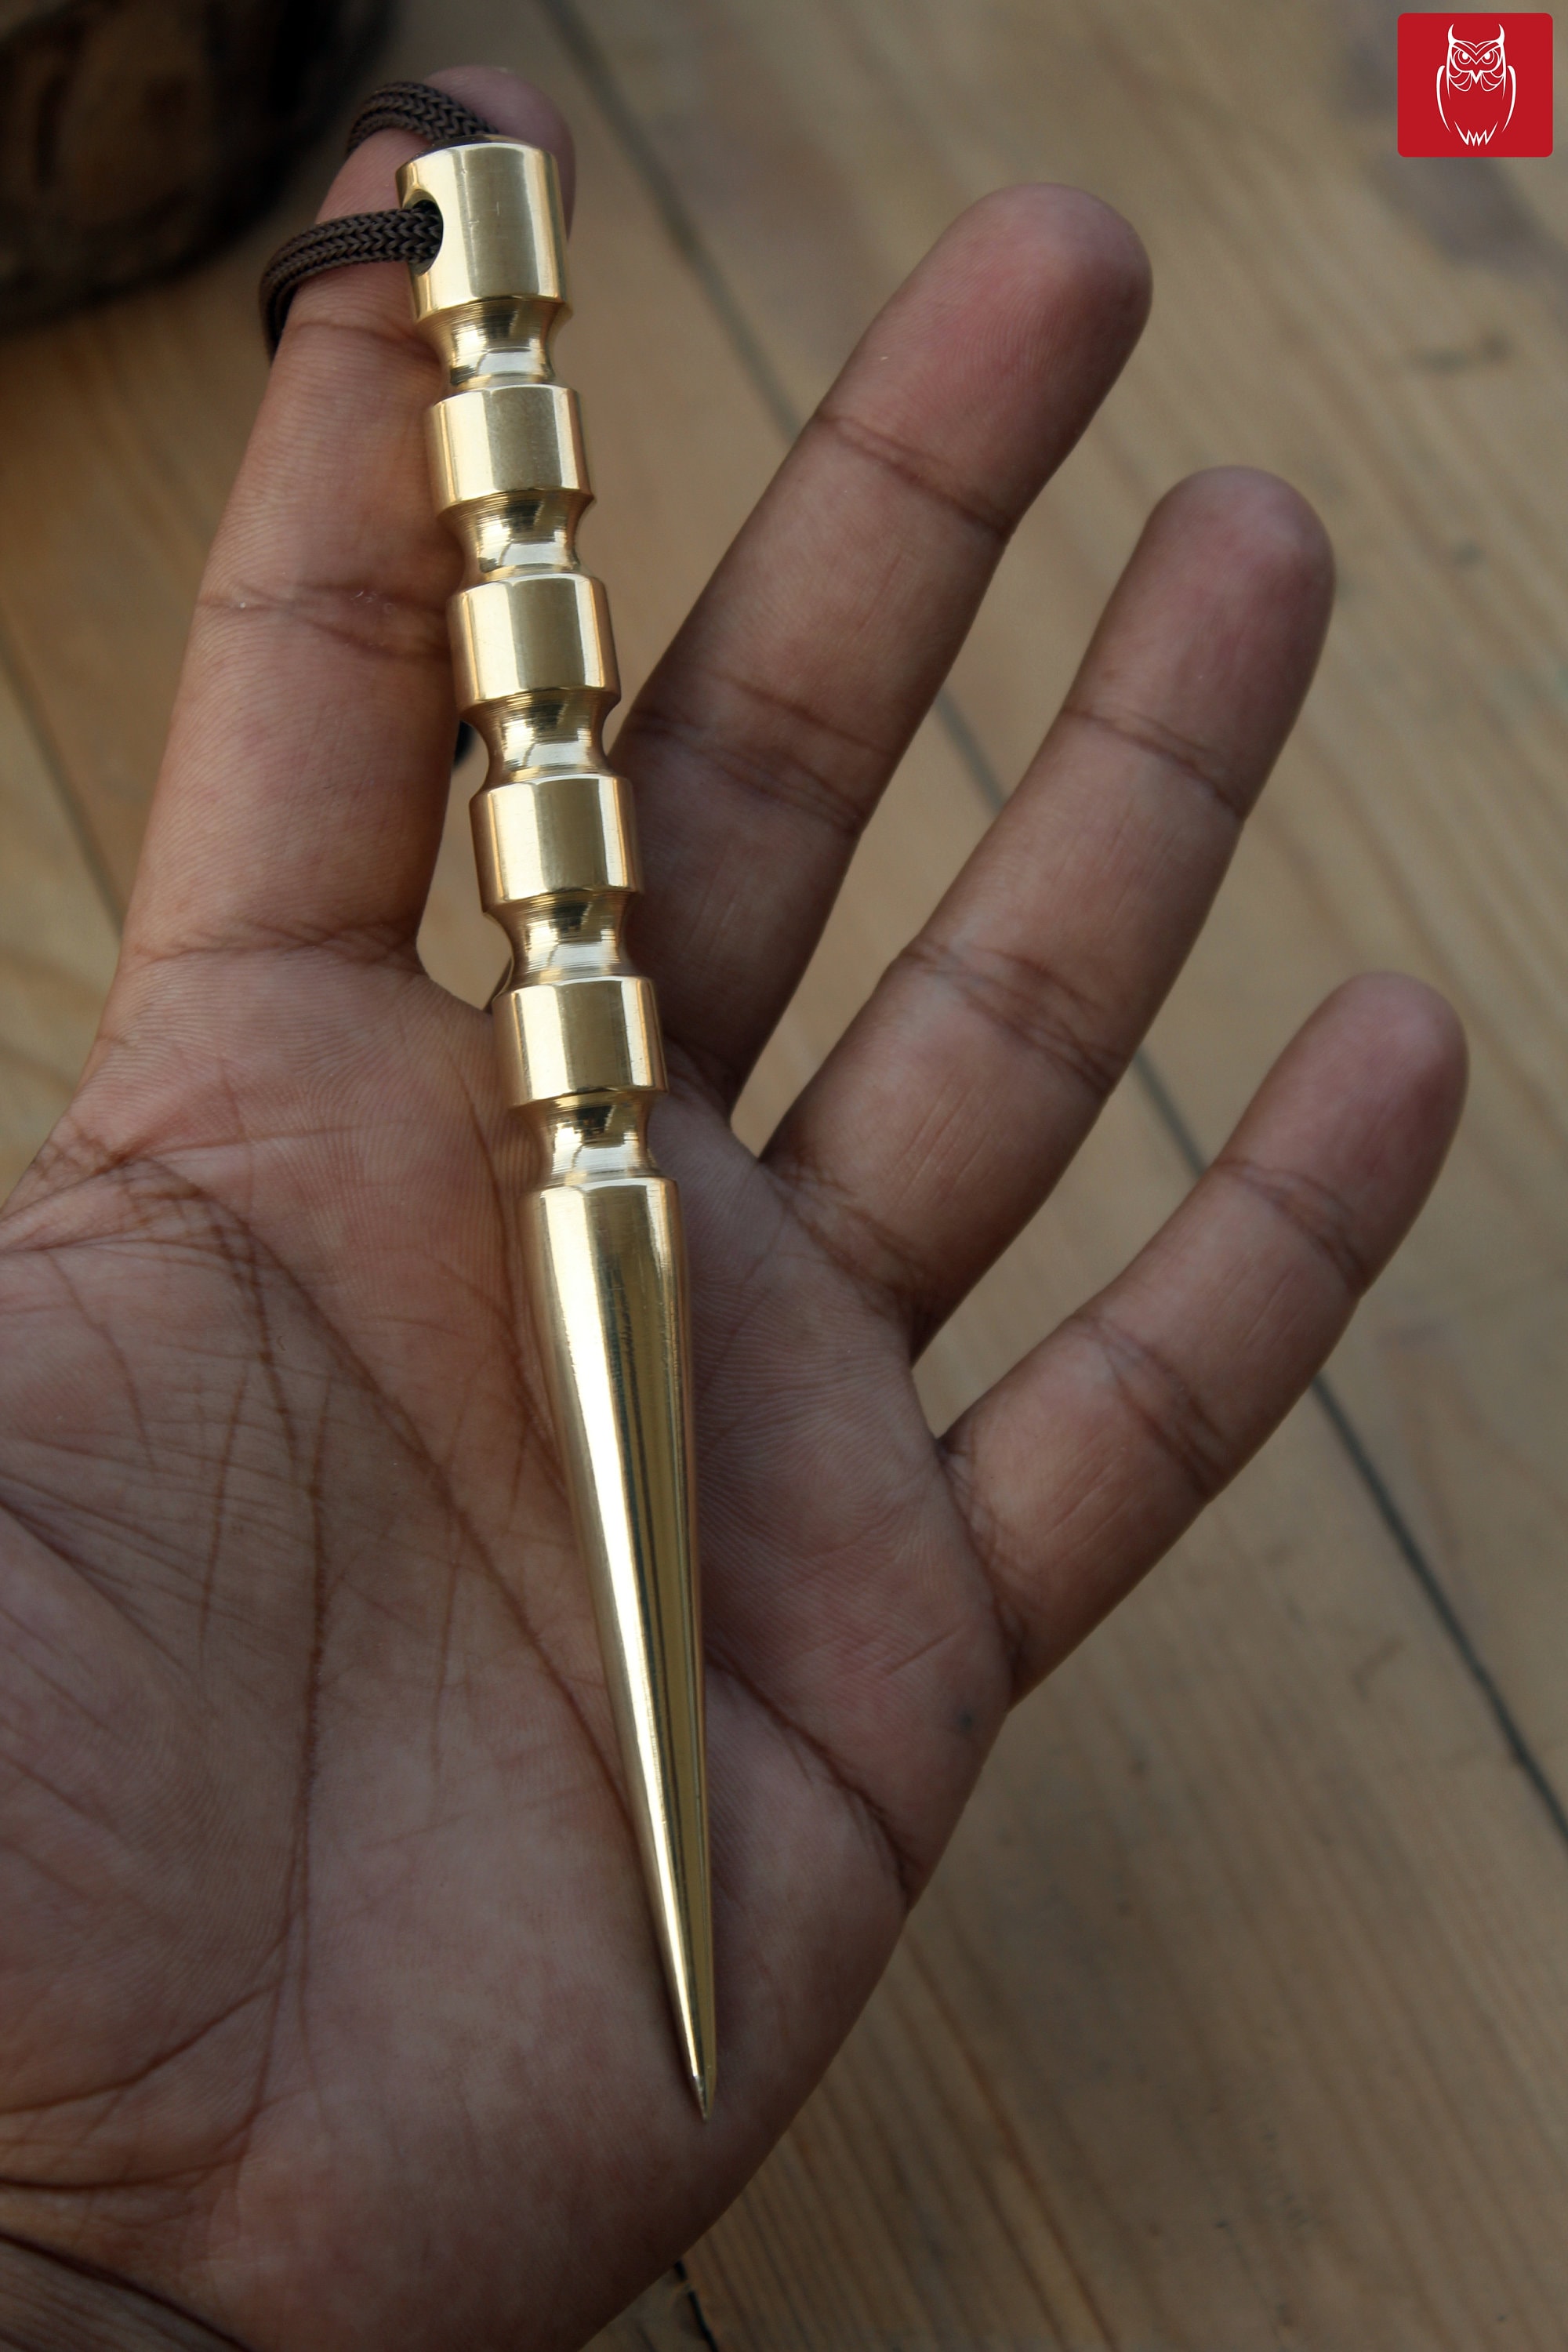 EDC Brass Marlinspike - Durable Marlin Spike for Paracord Knitting Sailing,  Boat